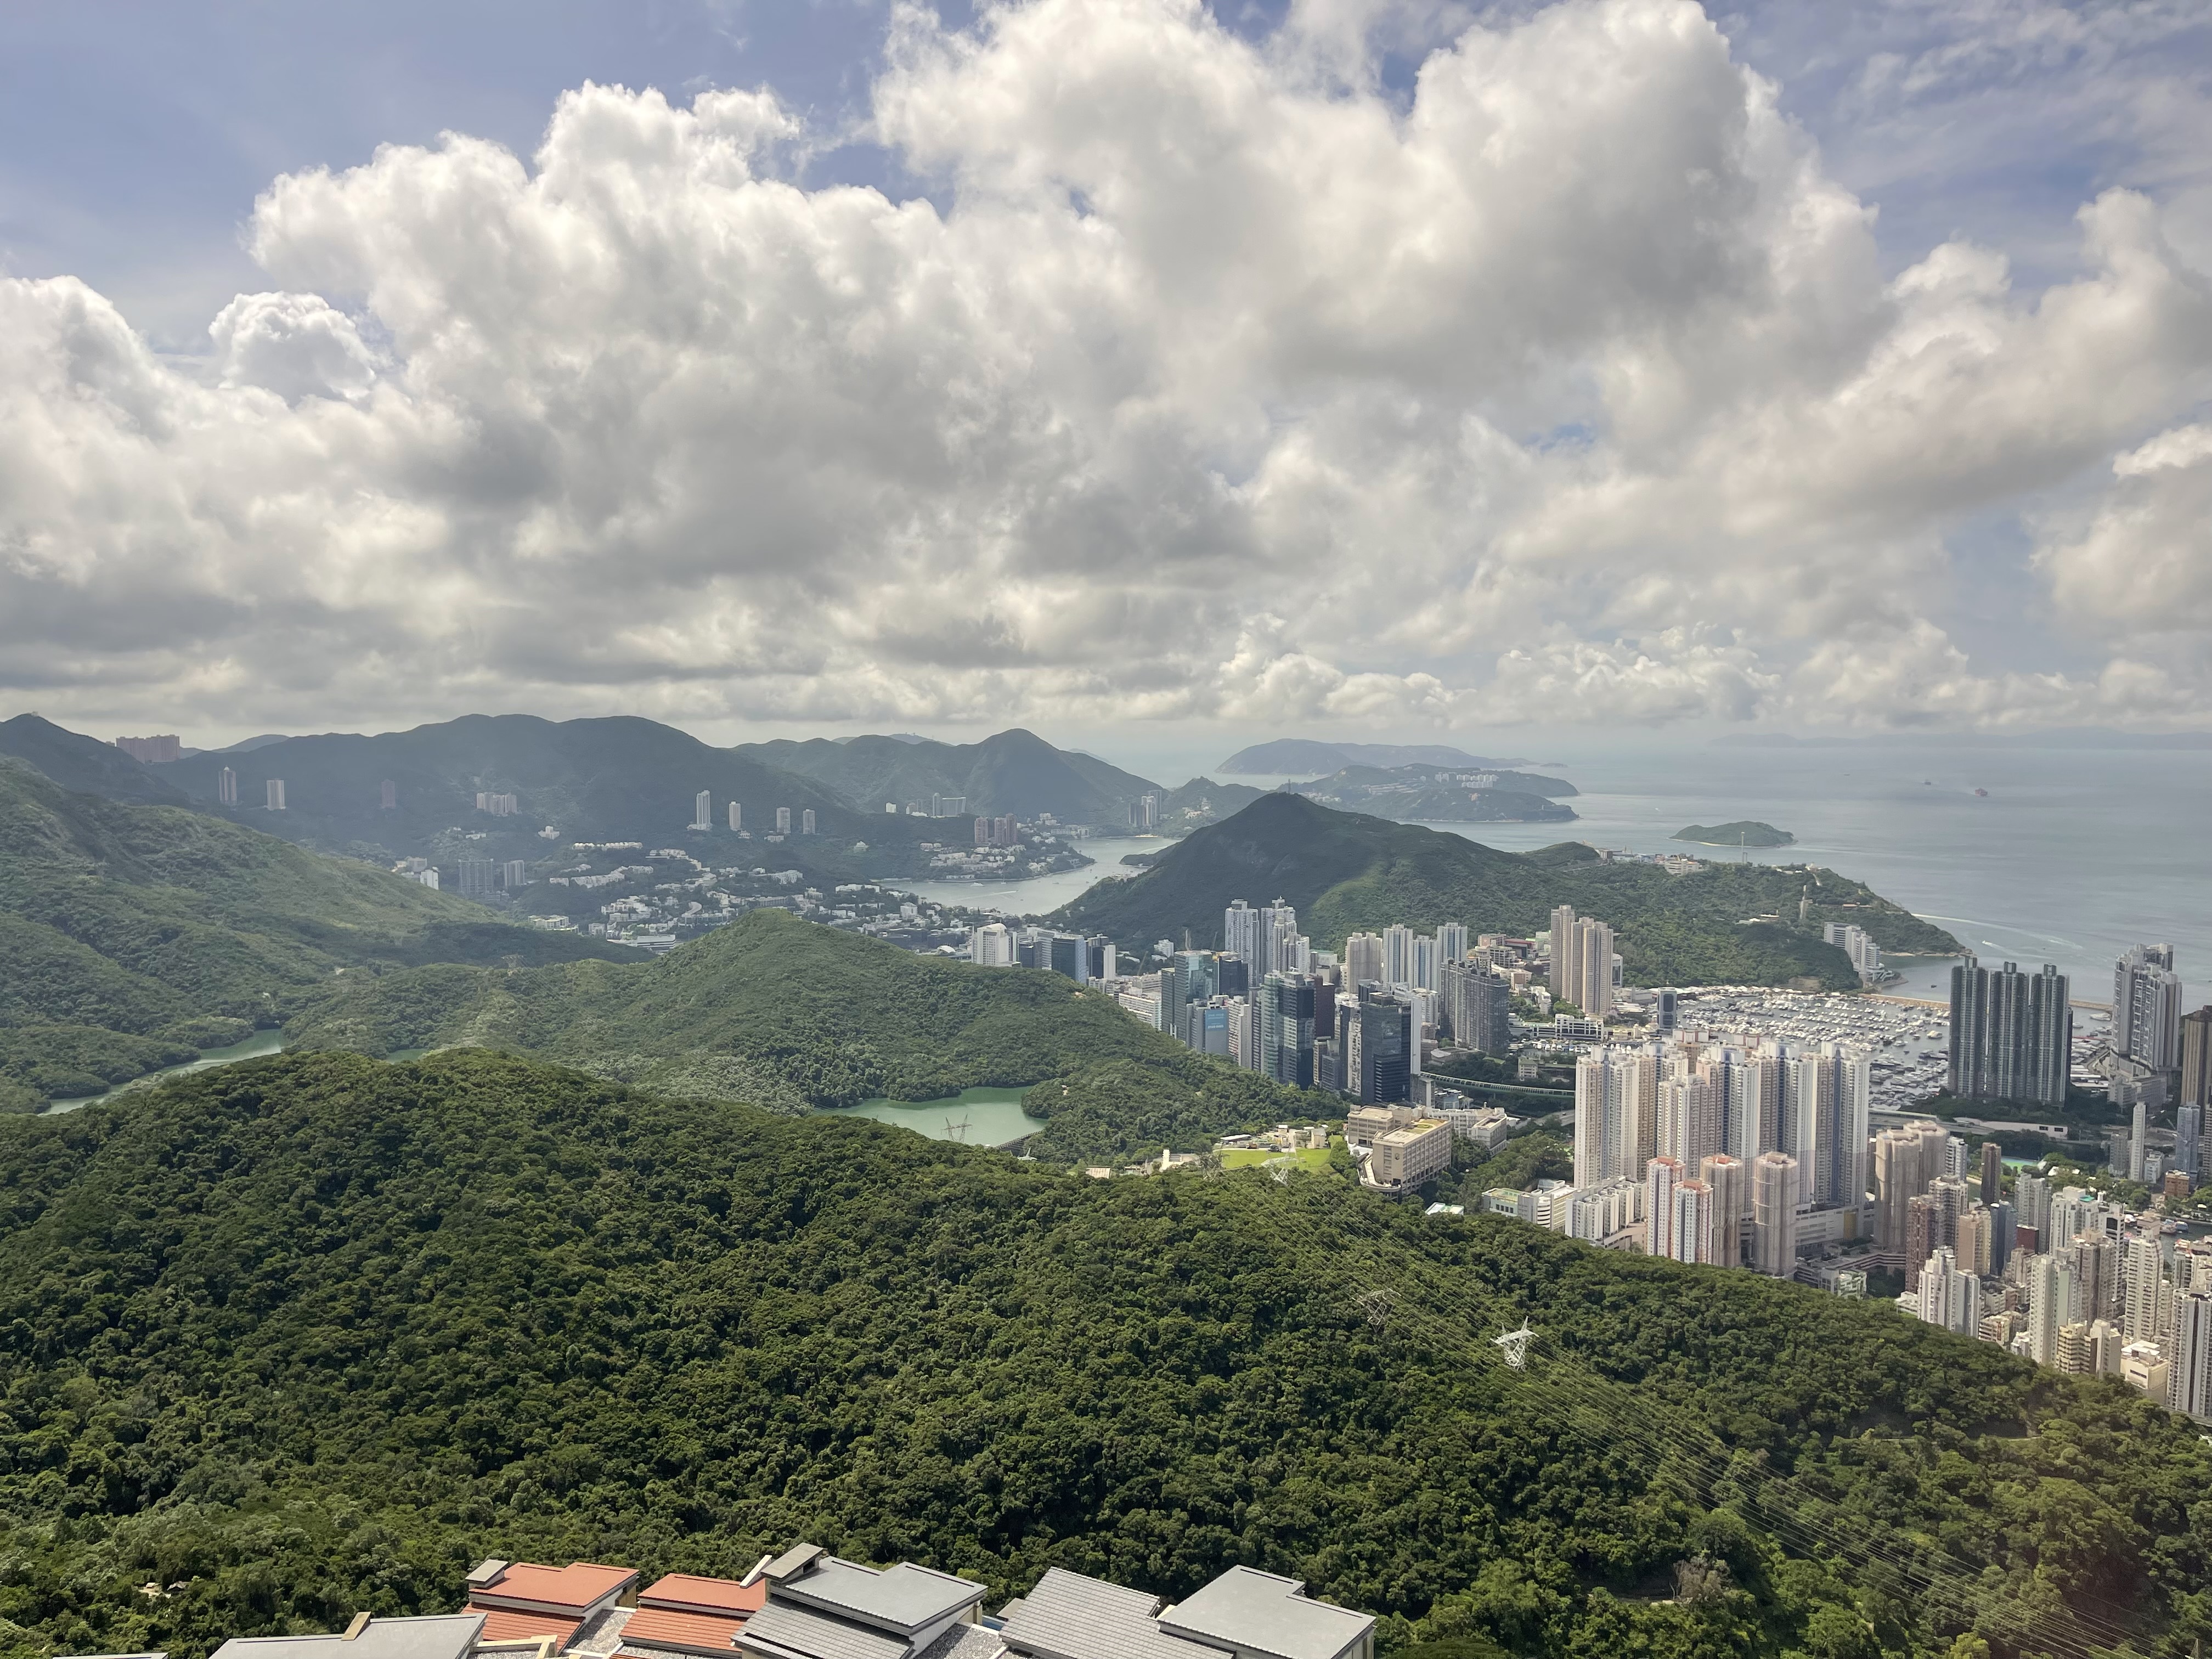 Looking southwest from the Peak in Hong Kong, across Wong Chuk Hang, and Aberdeen to Repulse Bay, Stanley, and the ocean, where container ships pass.